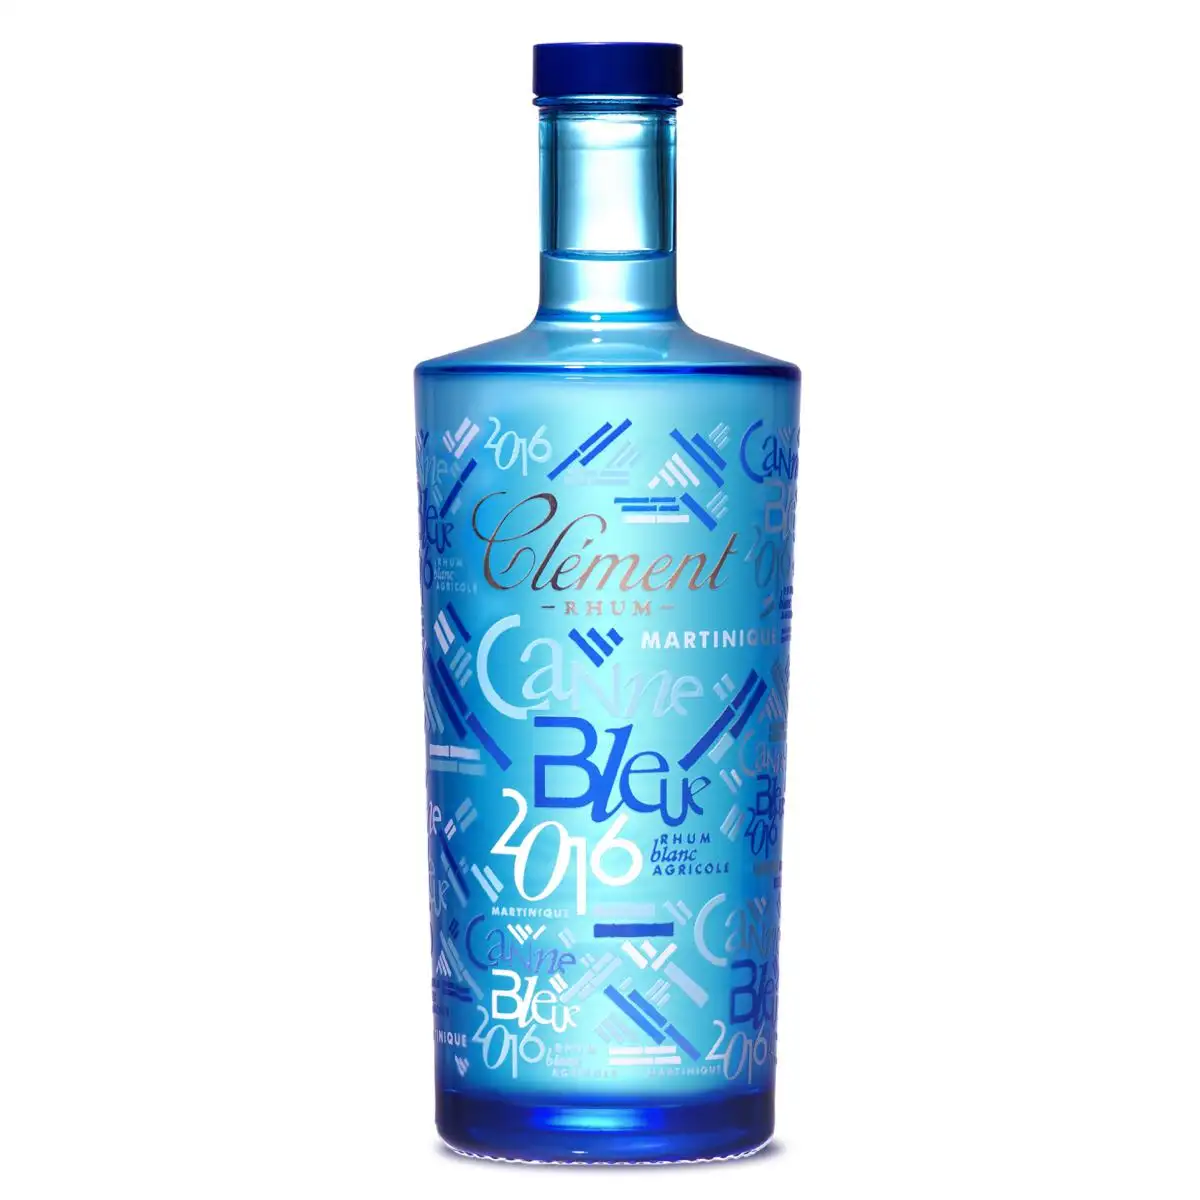 Image of the front of the bottle of the rum Canne Bleue